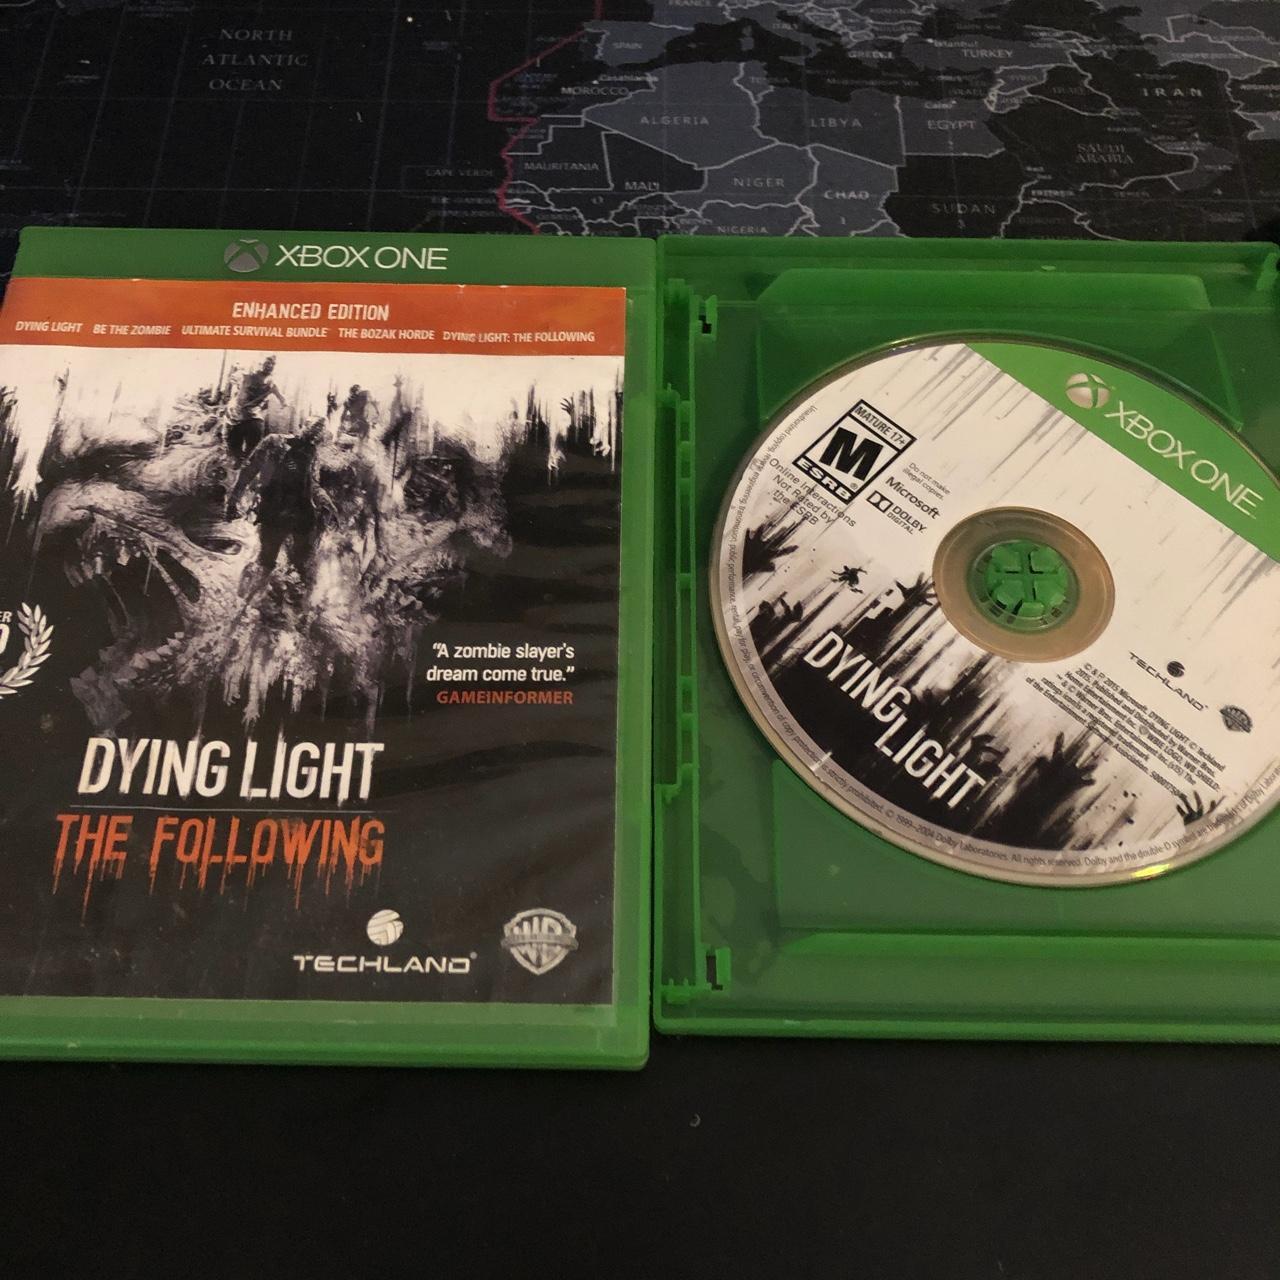 Dying Light: The Following Enhanced Edition - Xbox One, Xbox One